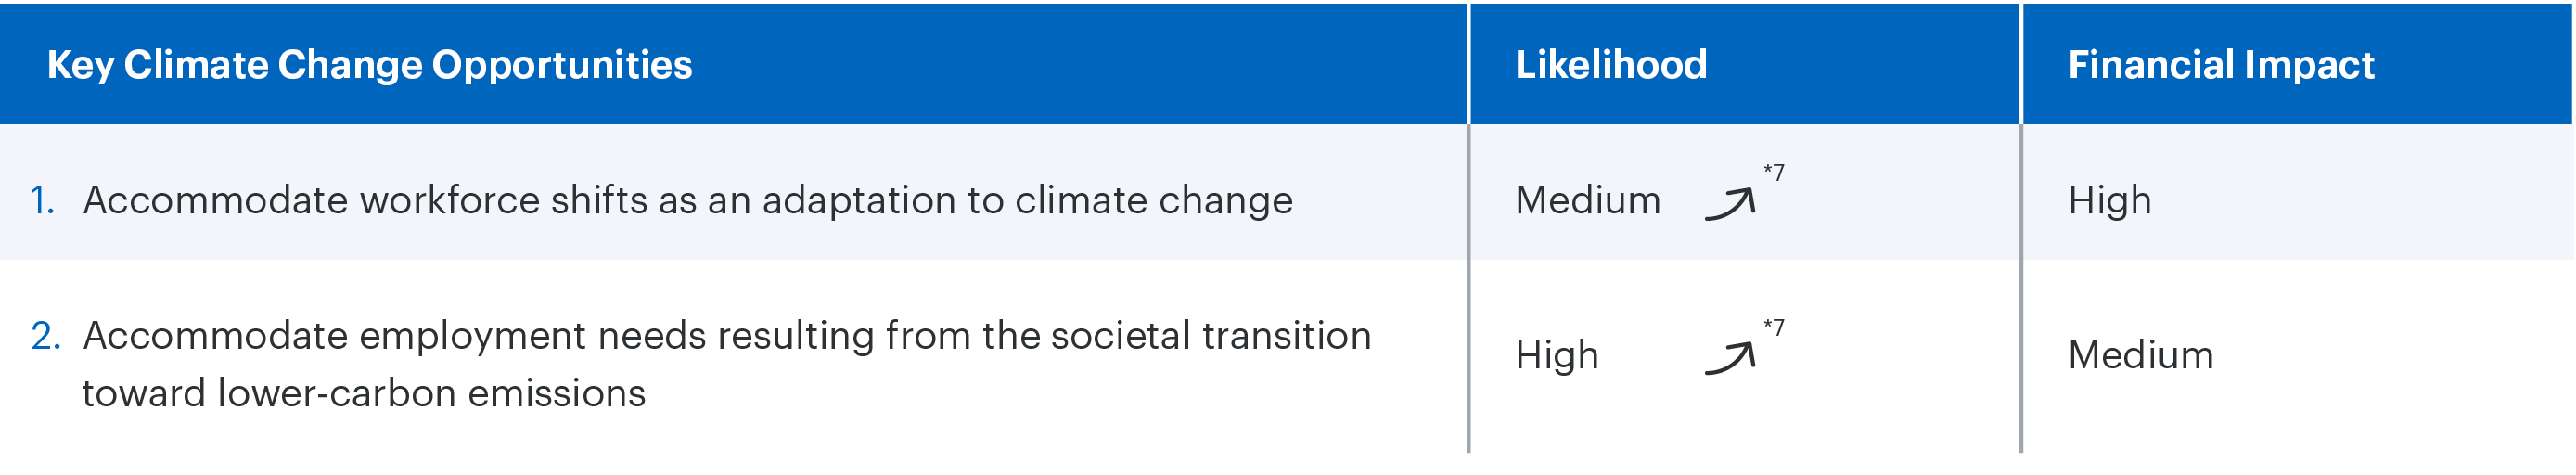 A table showing two key climate change opportunities and their likelihood and financial impact. For example, “Workforce shifts as an adaptation to climate change” has a medium likelihood and high financial impact.